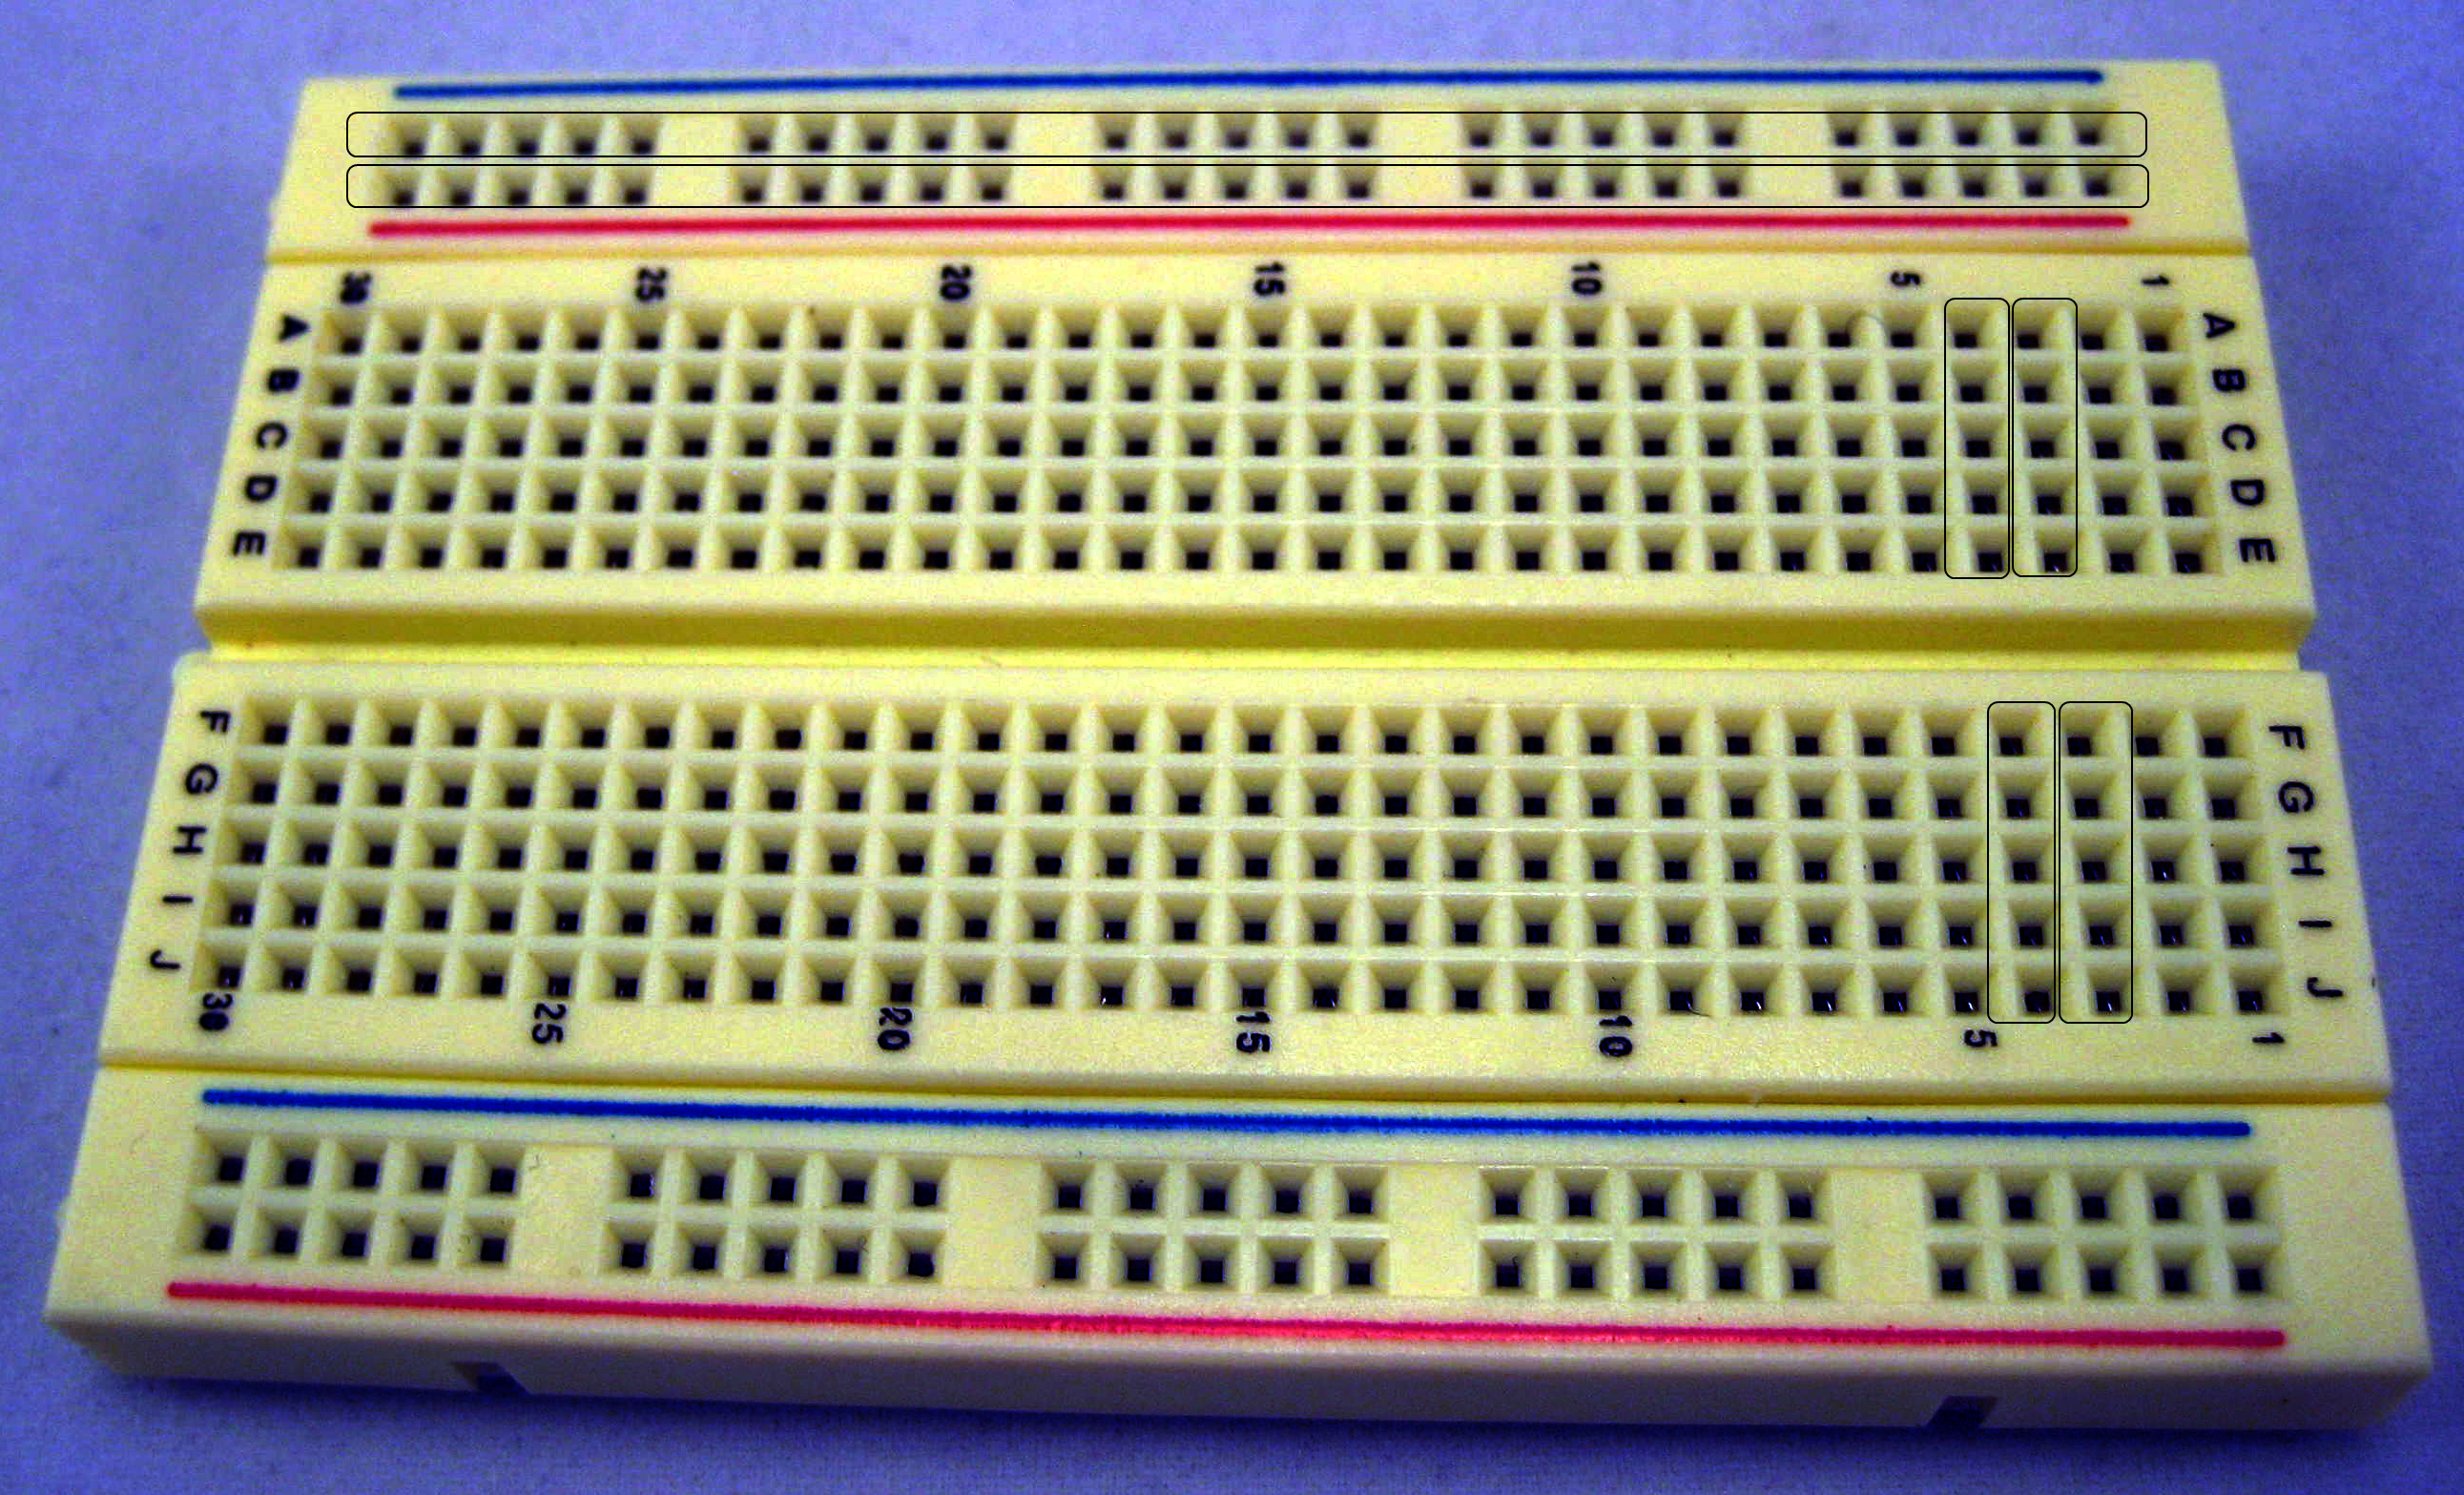 Figure 5: Use a breadboard to make temporary connections between electronics components.